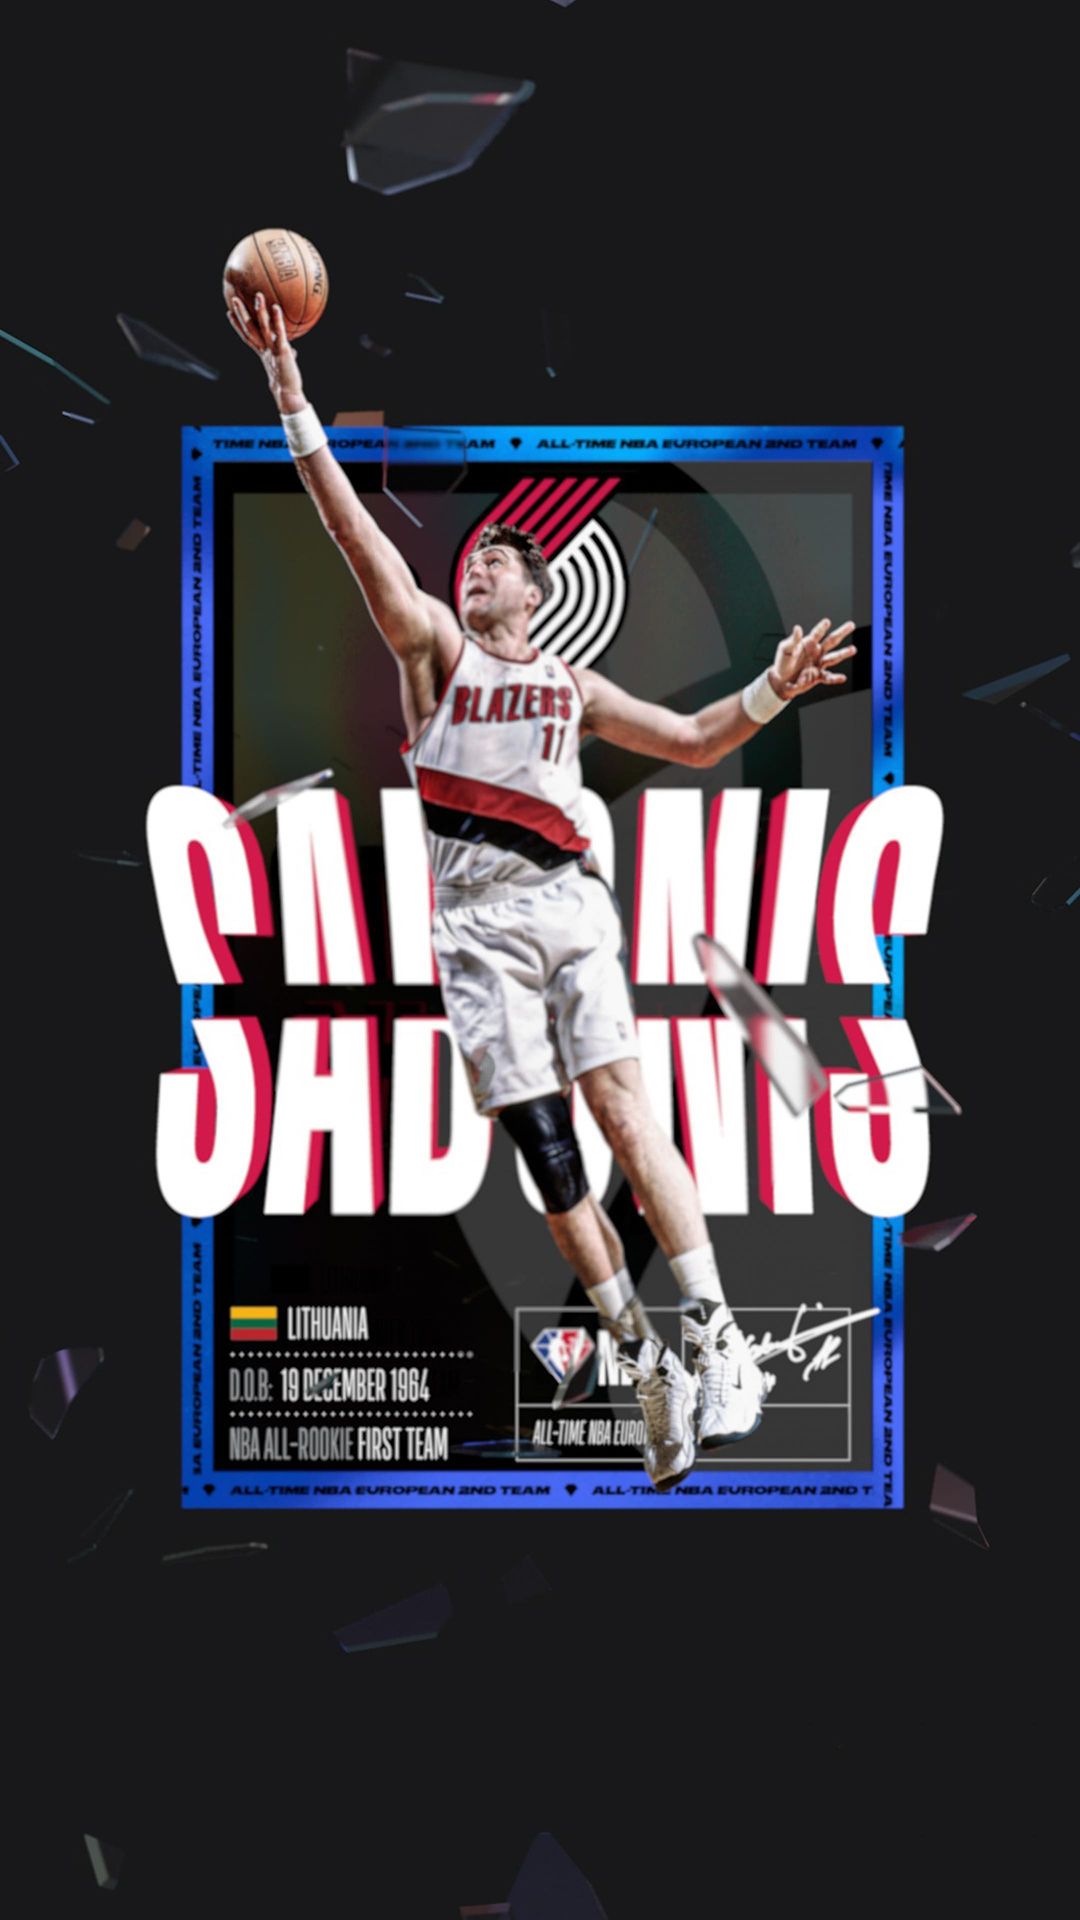 A pioneer of the game. Arvydas Sabonis joins the All-Time NBA European 2nd team ...